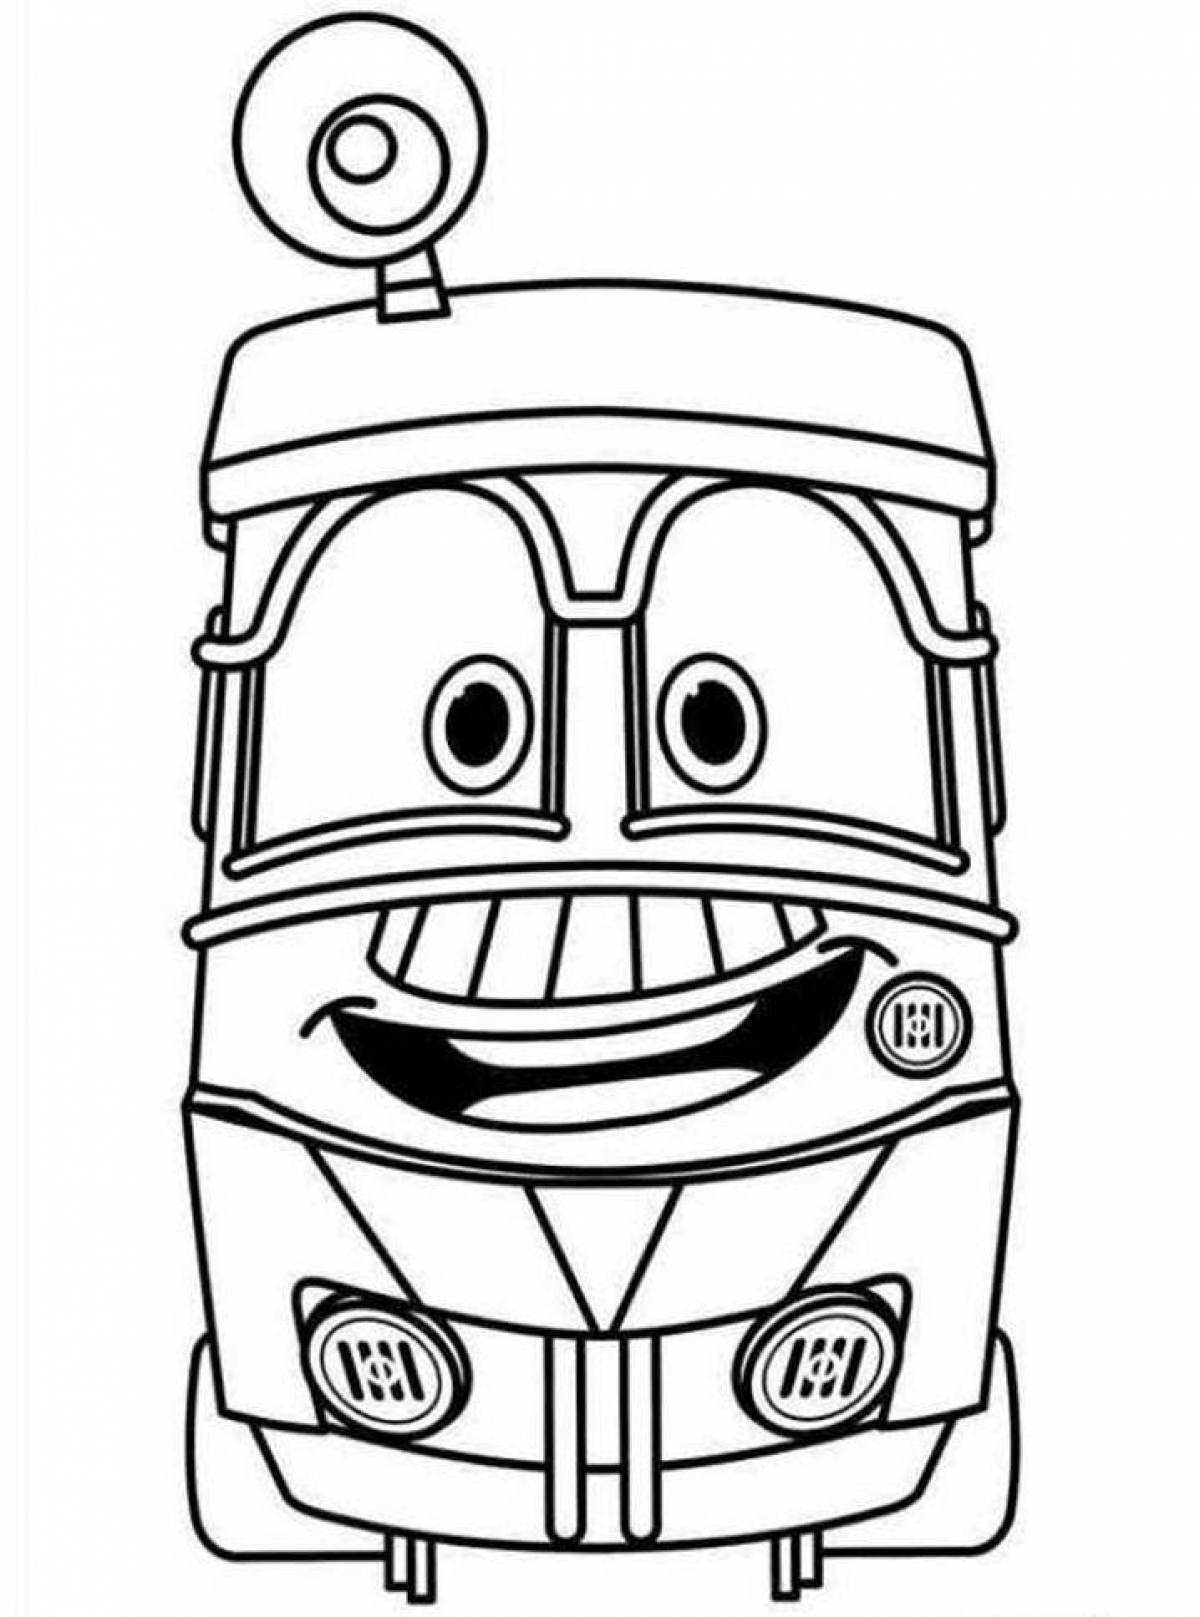 Adorable Robot Train Coloring Pages for Kids